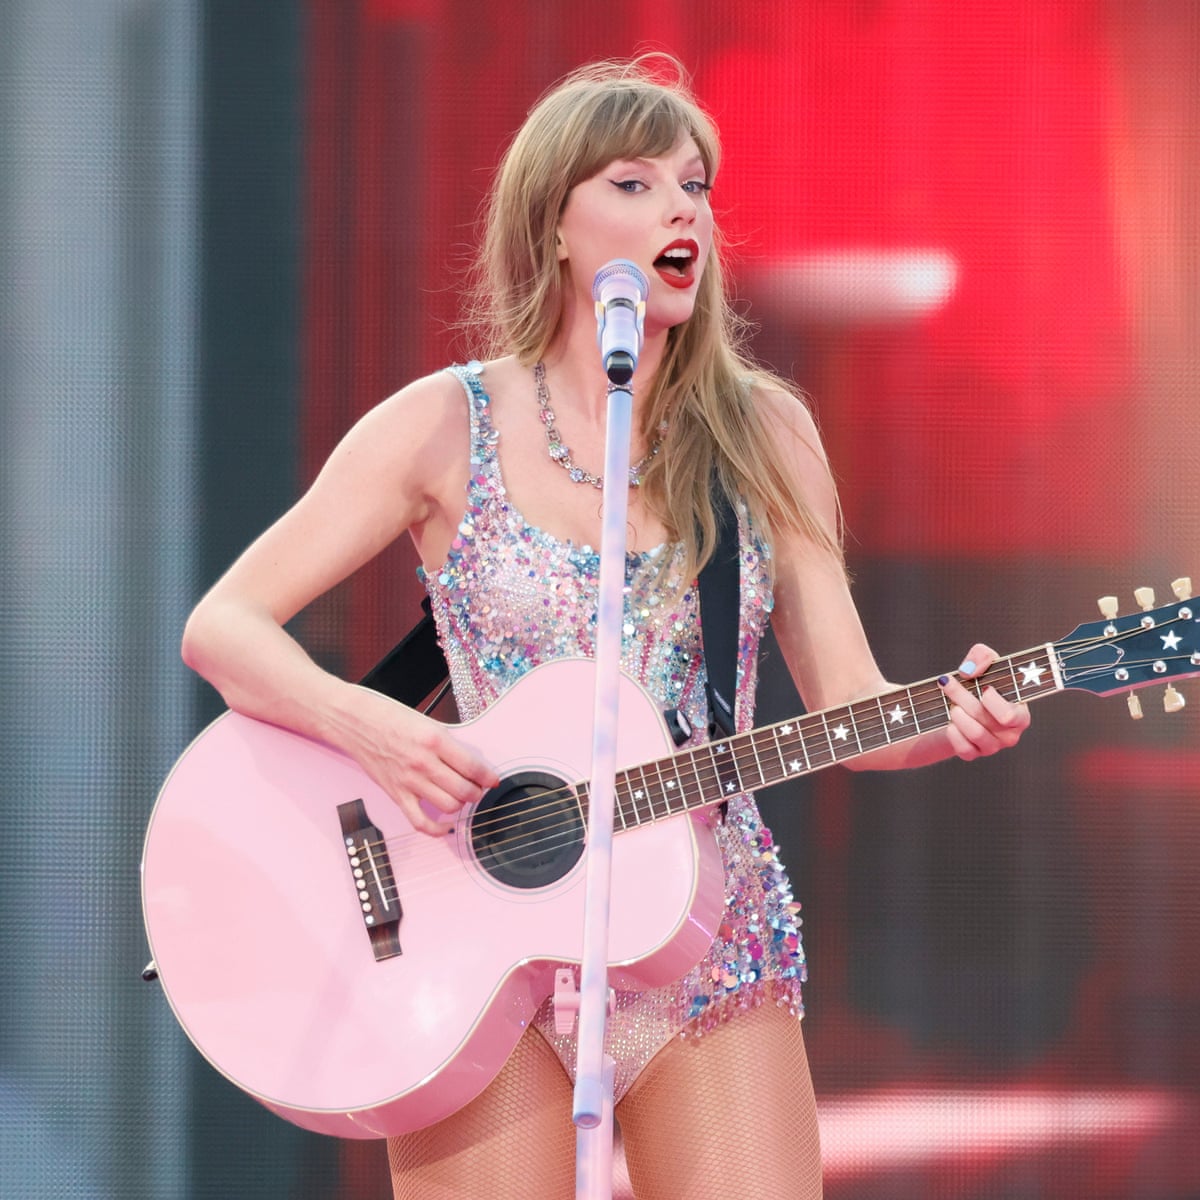 Taylor Swift: Speak Now (Taylor's Version) review – re-recording project  starting to feel wearying and pointless, Taylor Swift